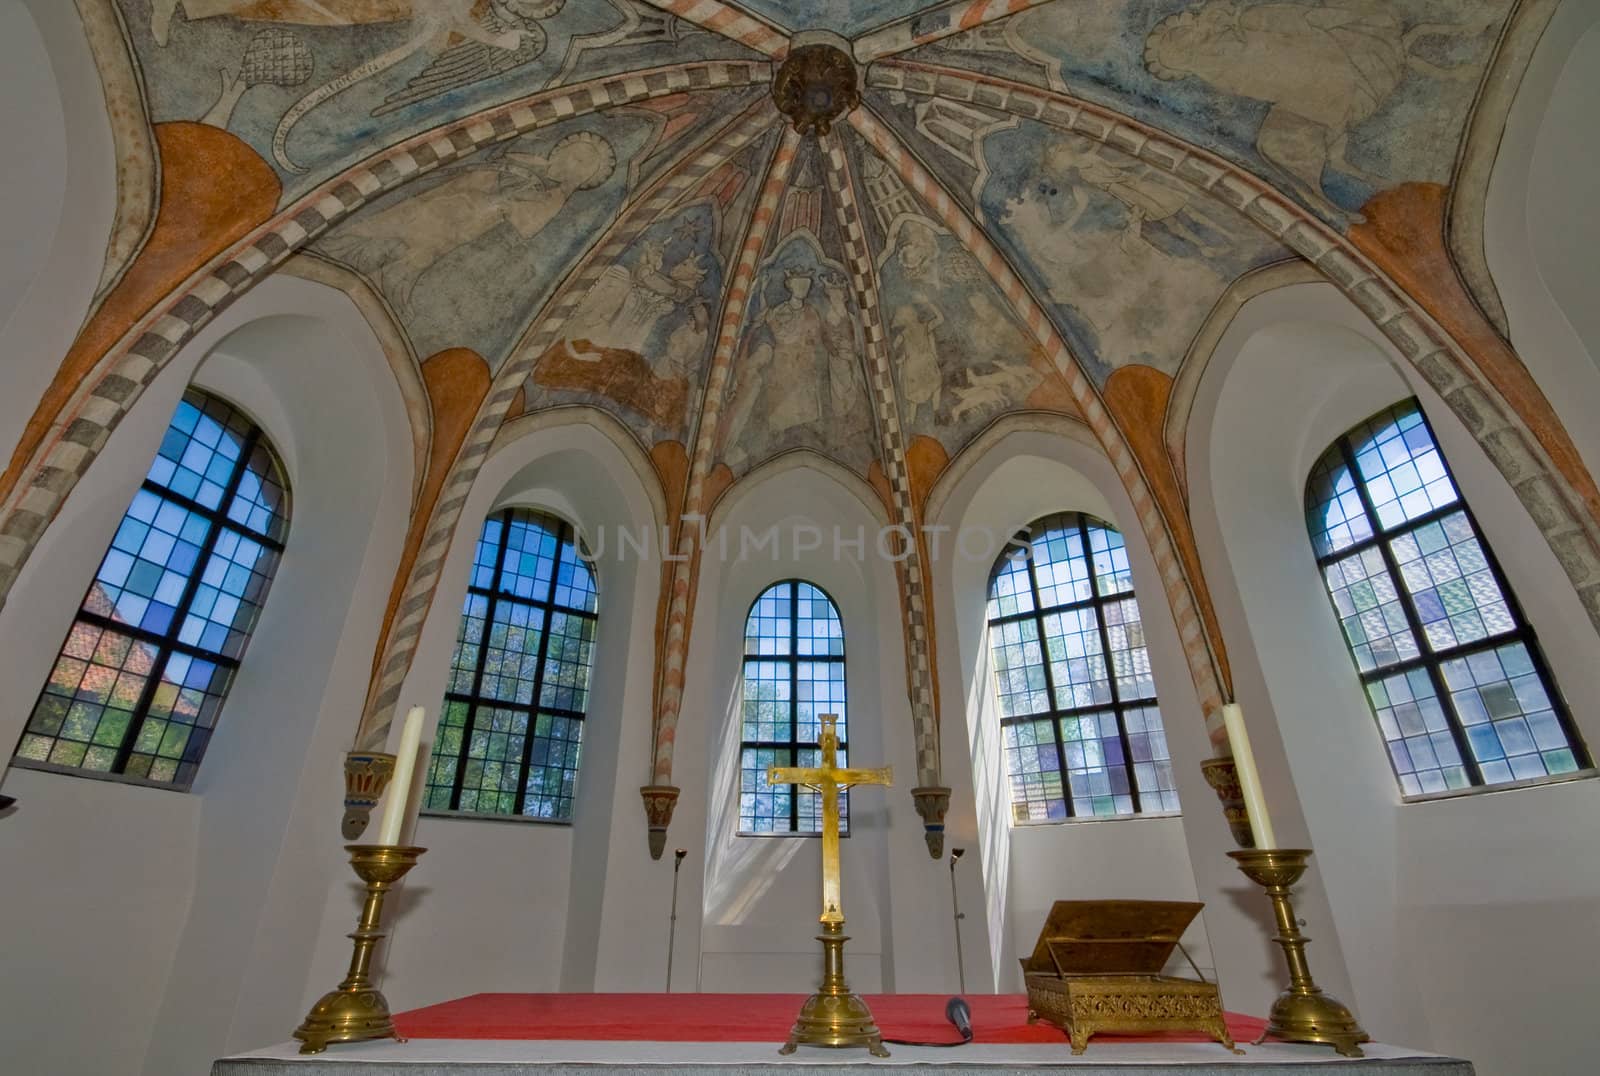 five windows of a church from inside with frescos on the ceiling